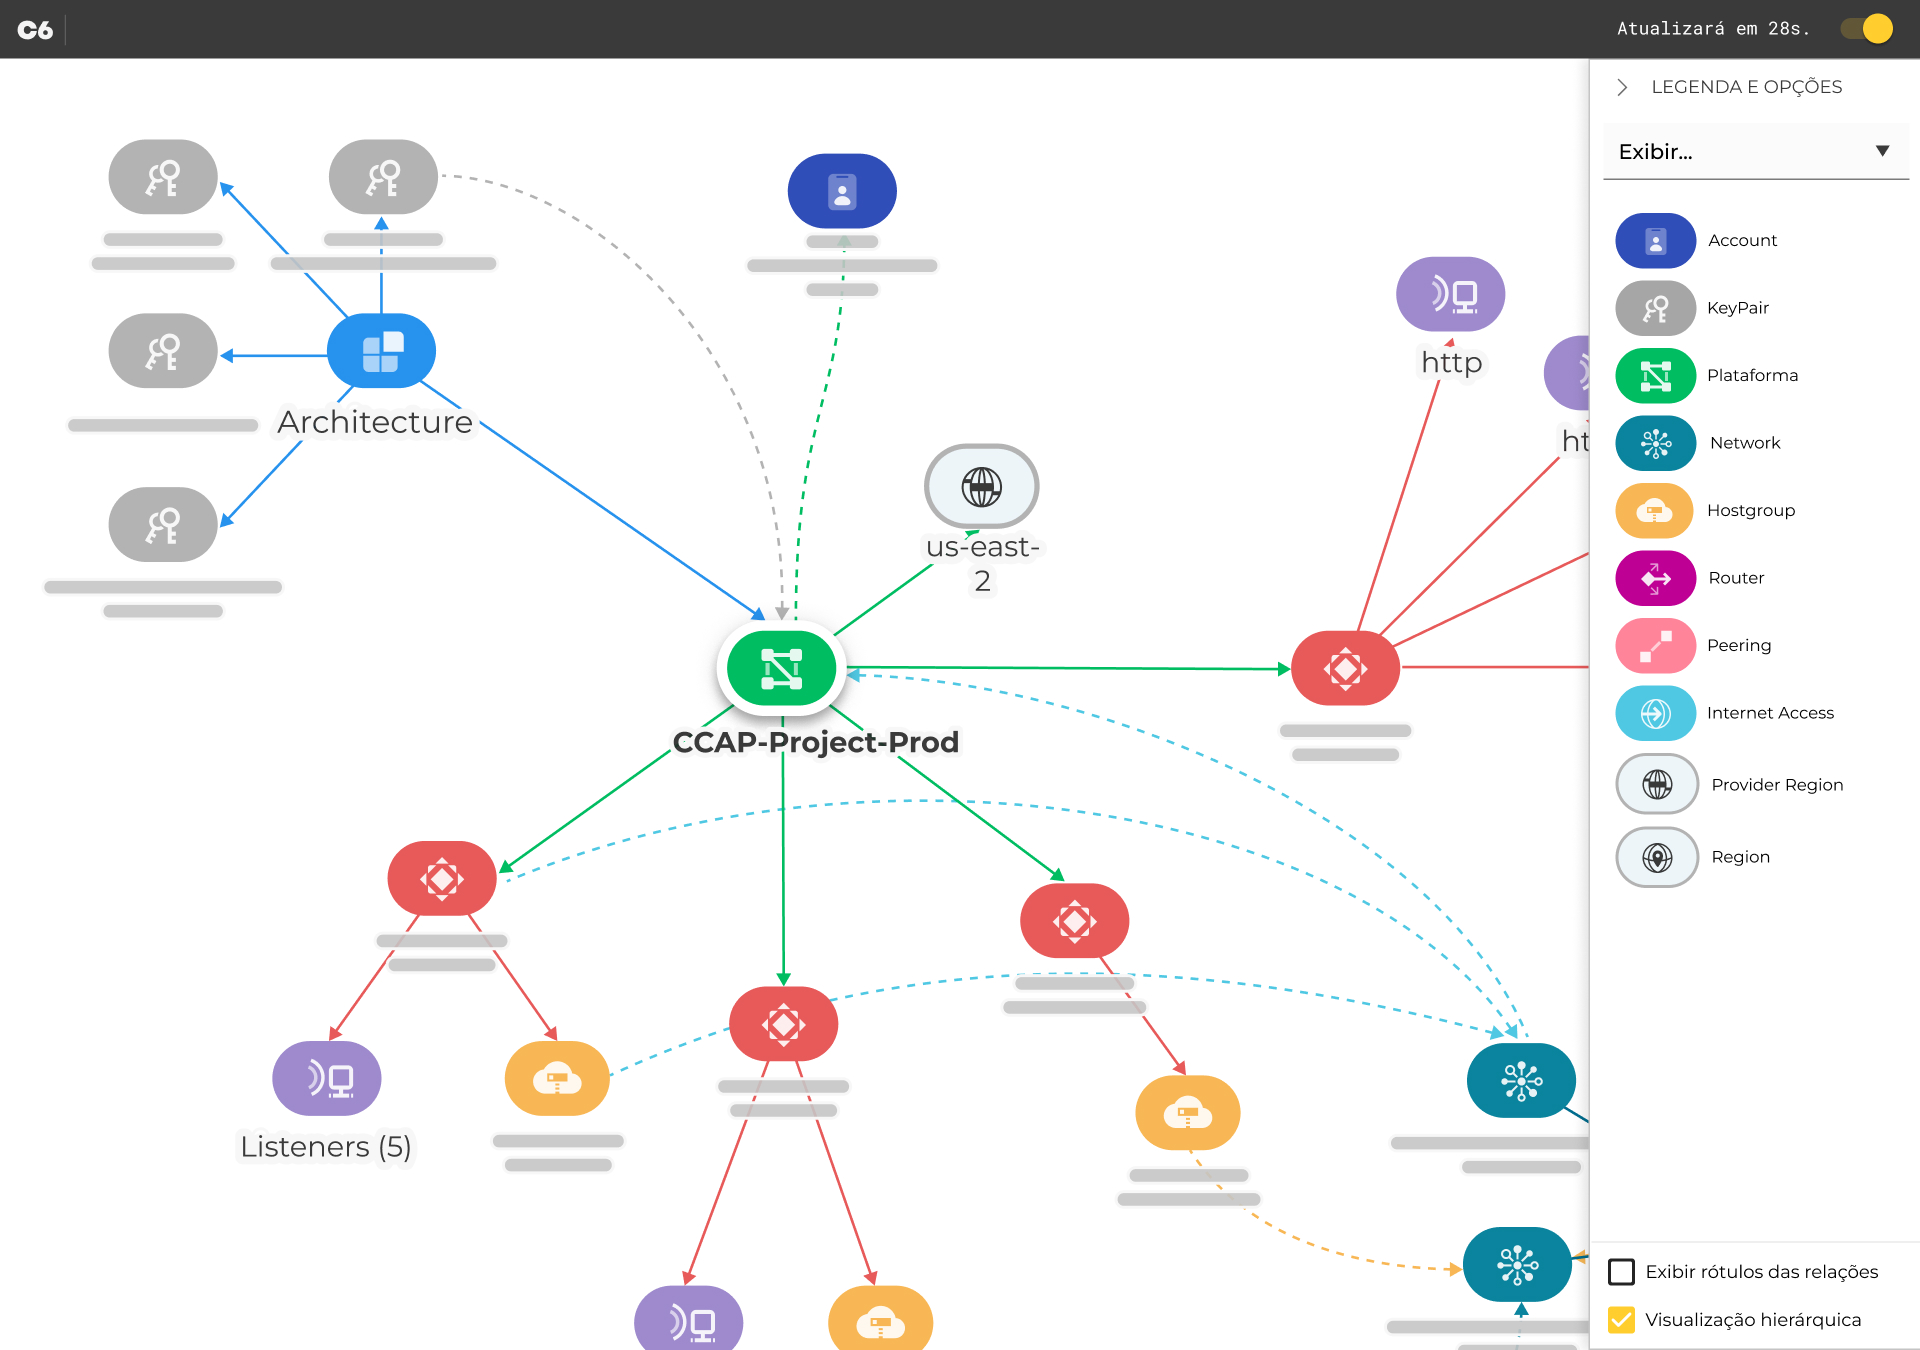 Interactive cloud network diagram with several colorful icons designed for the C6 Bank design system.